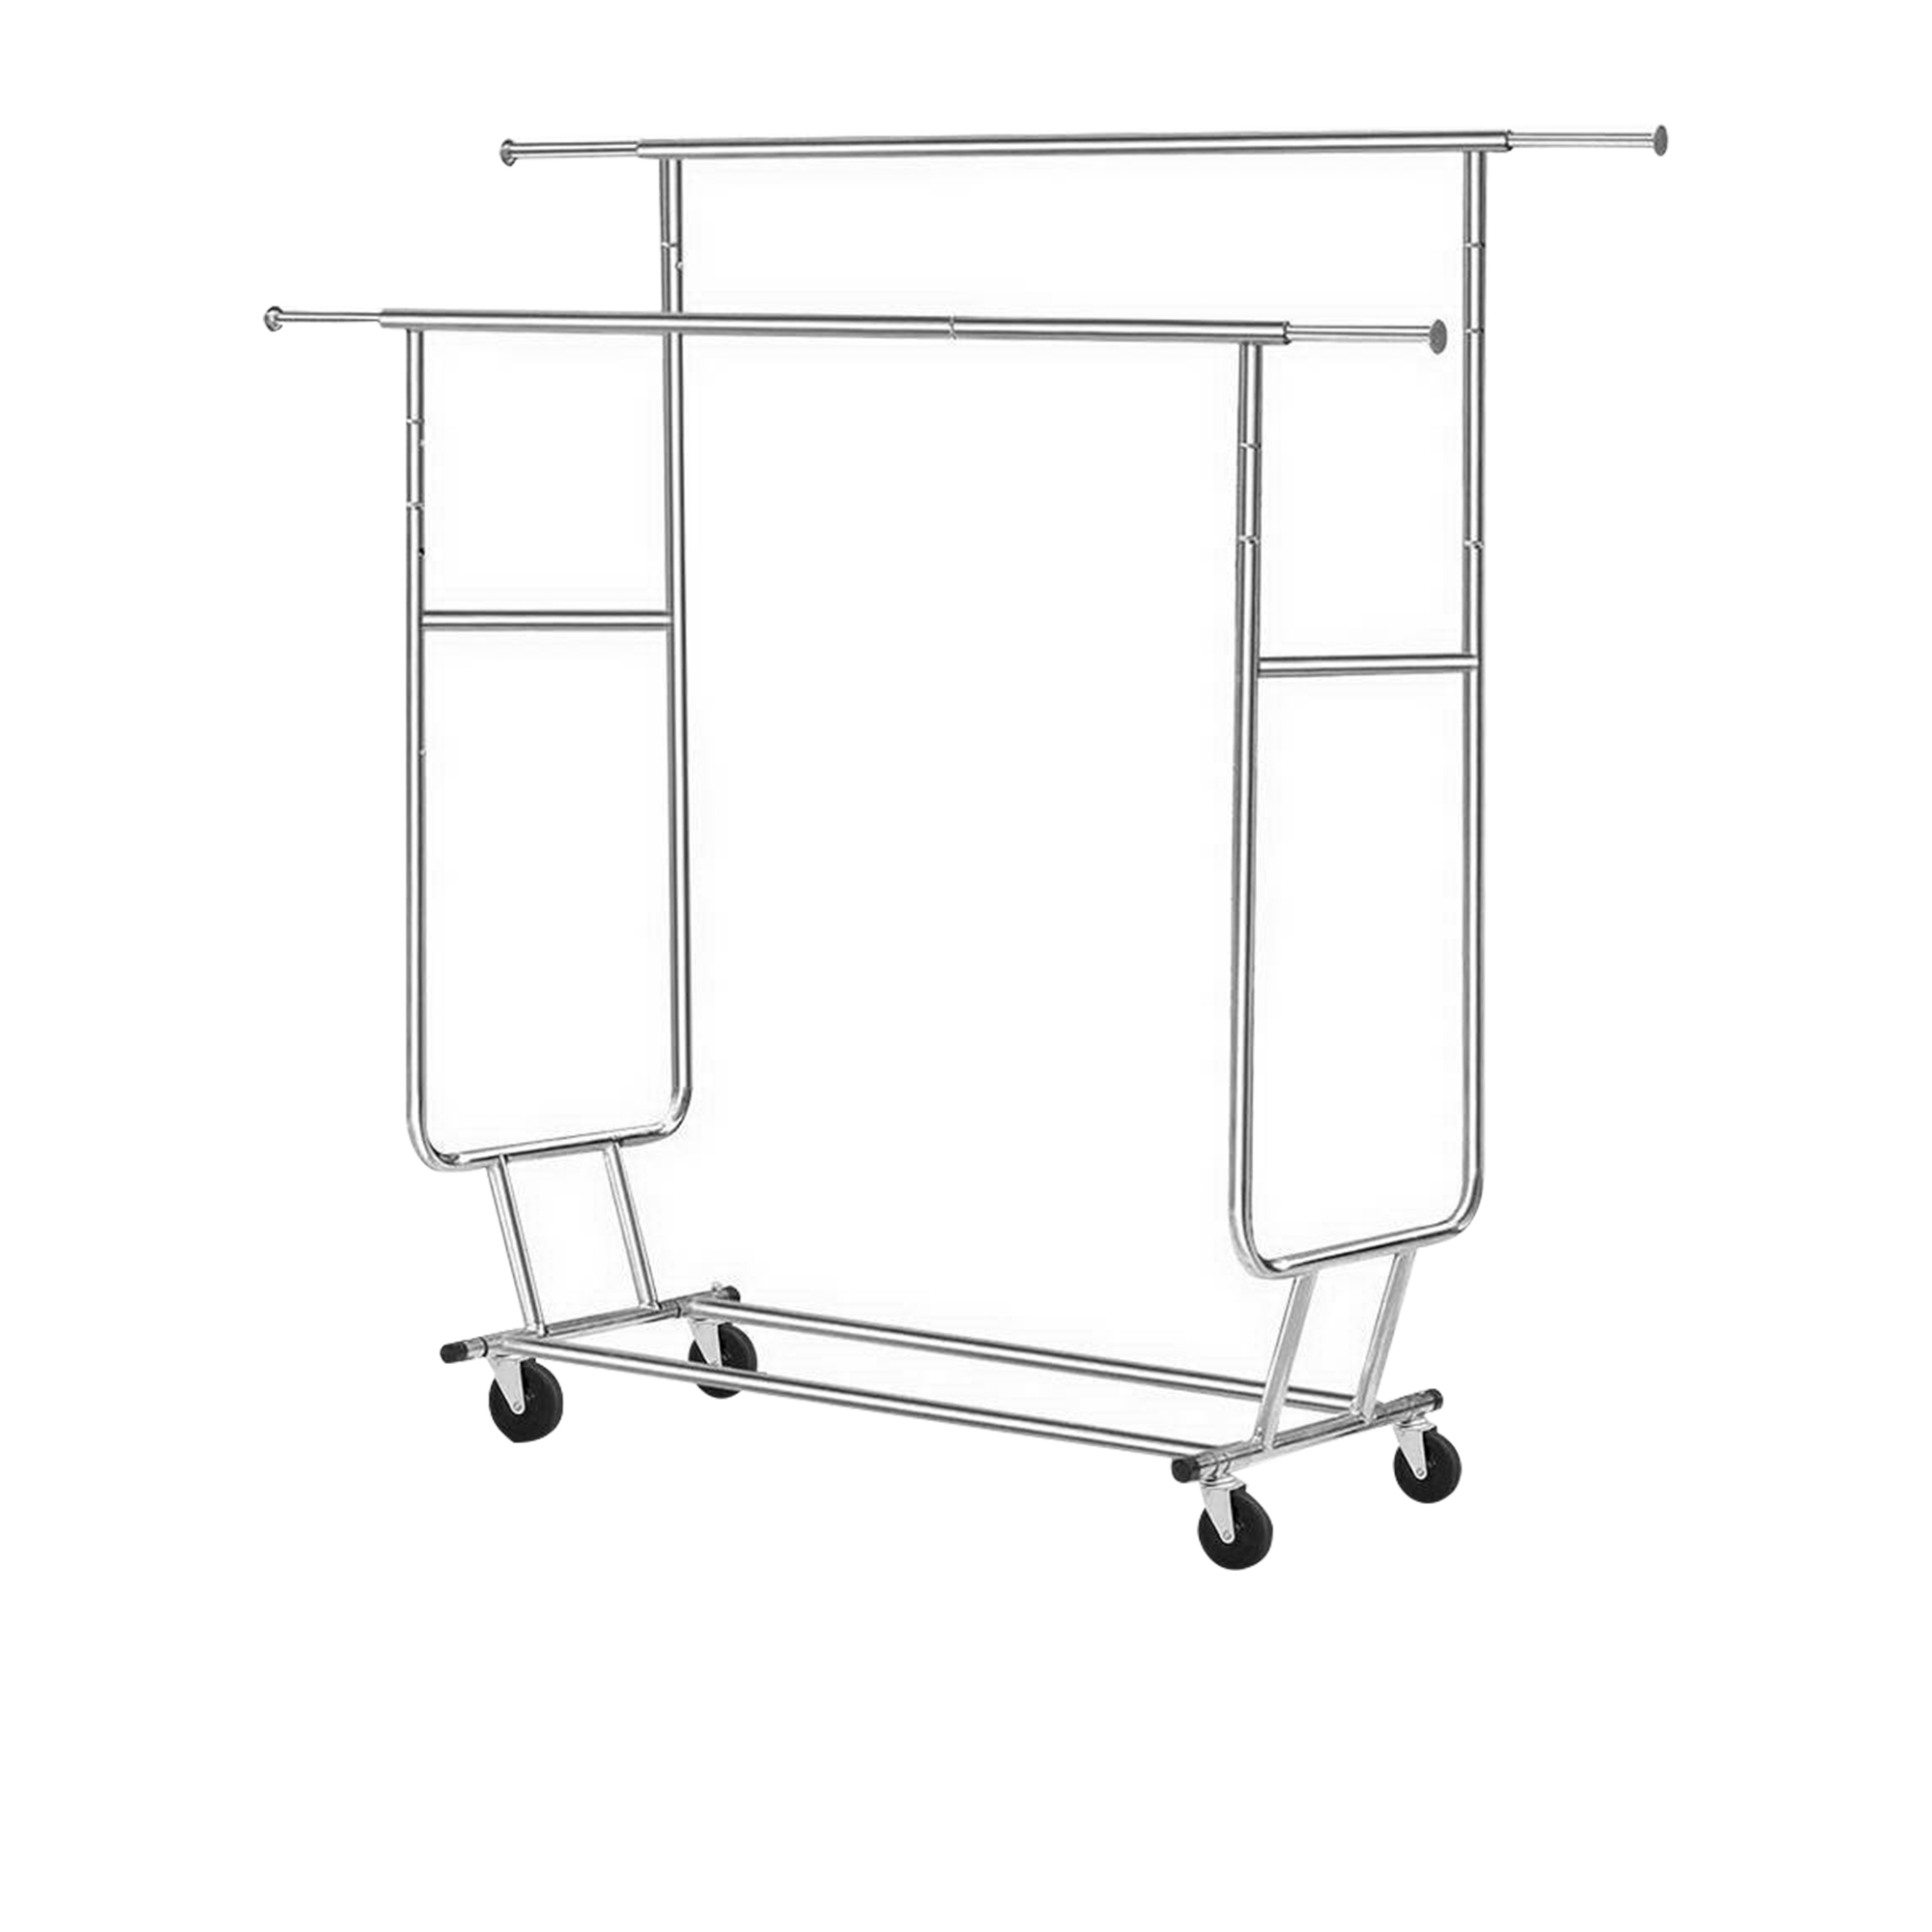 Artiss Double Rail Portable Clothes Drying Rack Silver Image 1